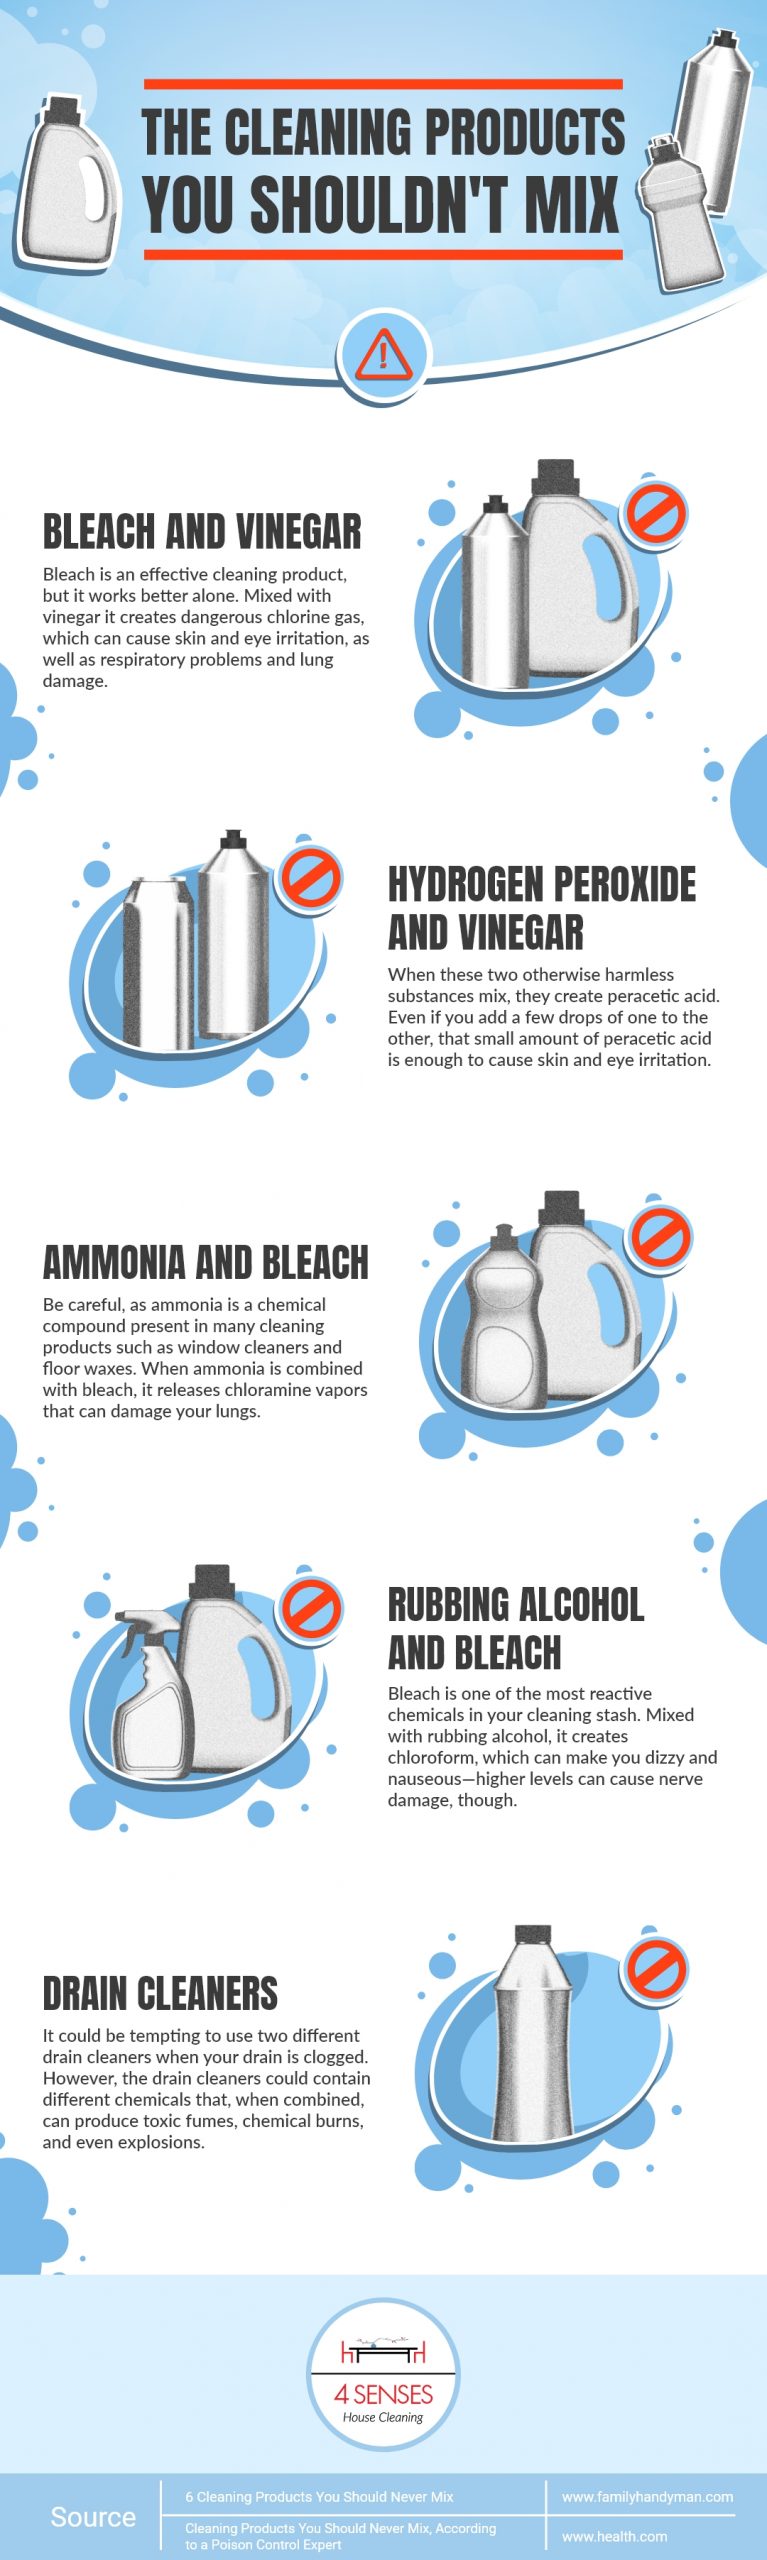 Cleaning Products You Should Avoid